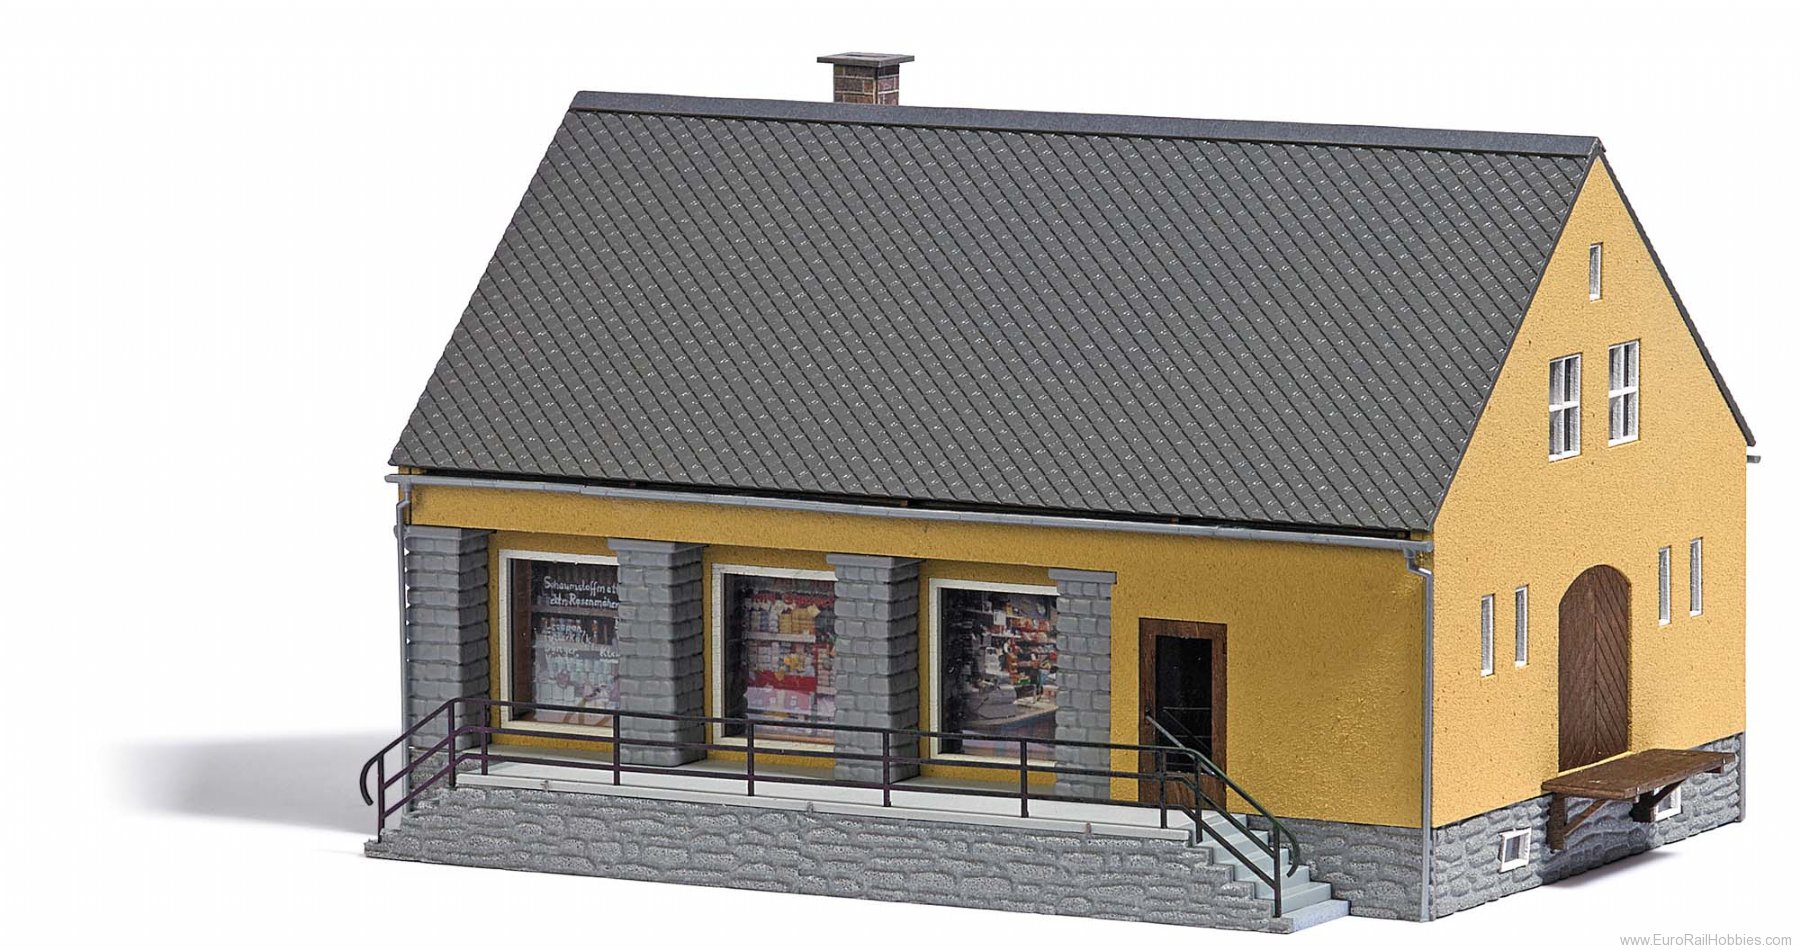 Busch 1381 GDR country store, 164x112x102 mm